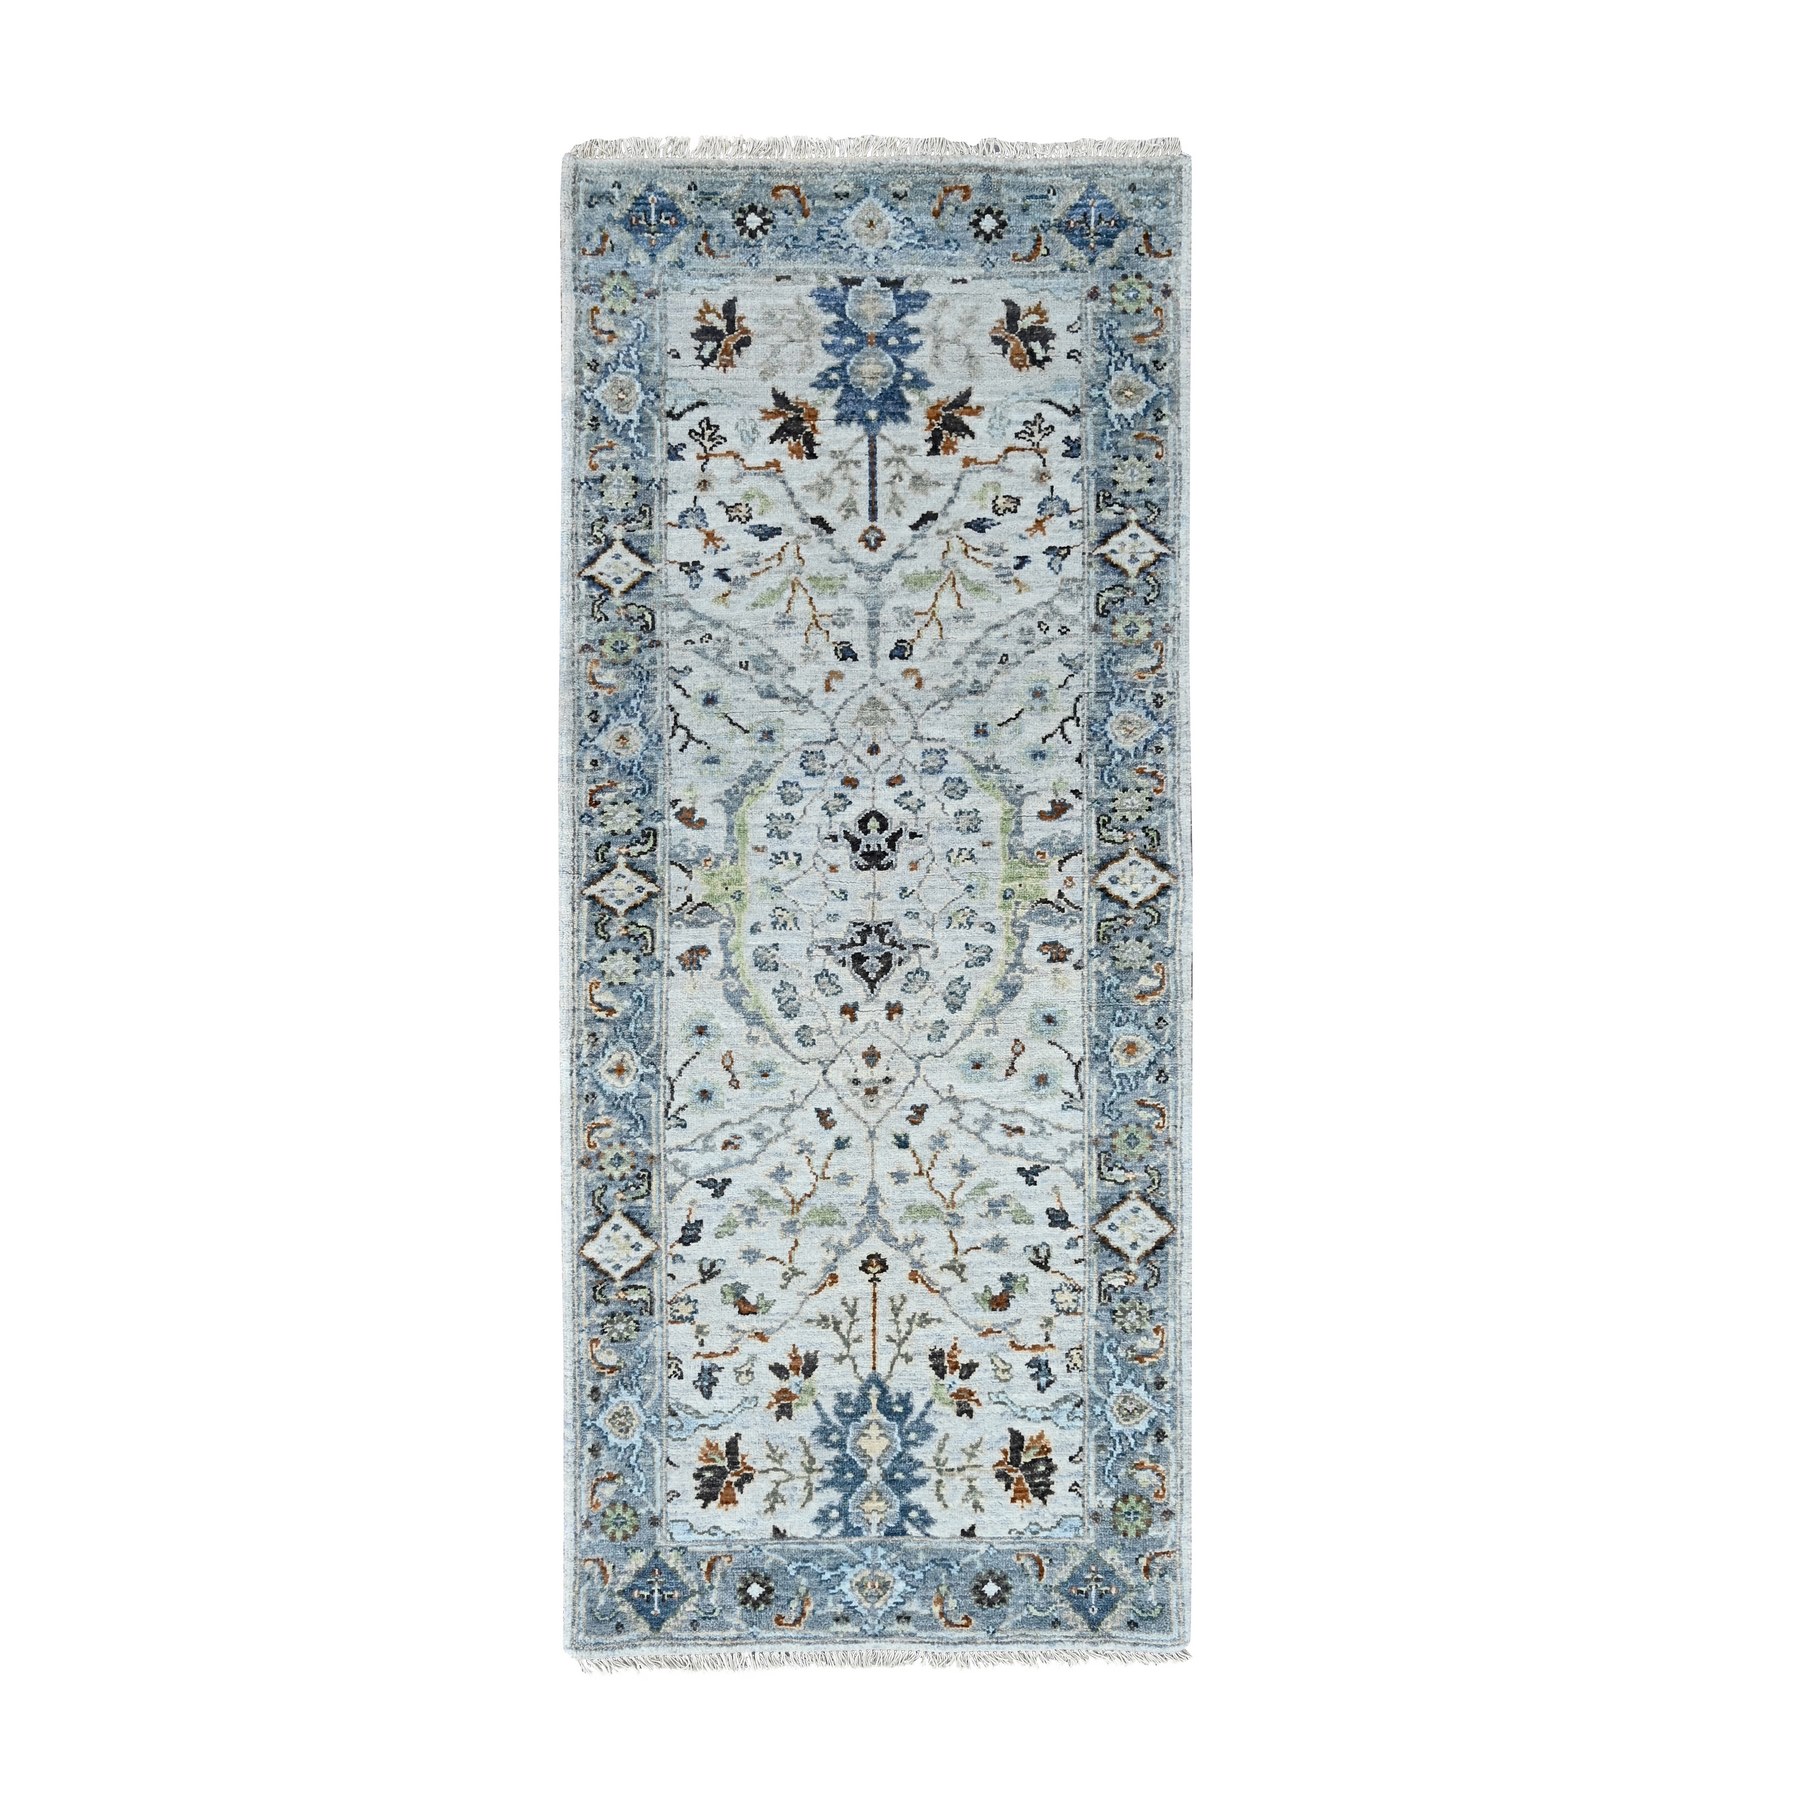 Shark Gray, Natural Dyes, Pure Wool, Denser Weave, Hand Knotted Oushak Design with Floral Motifs, Runner Oriental Rug